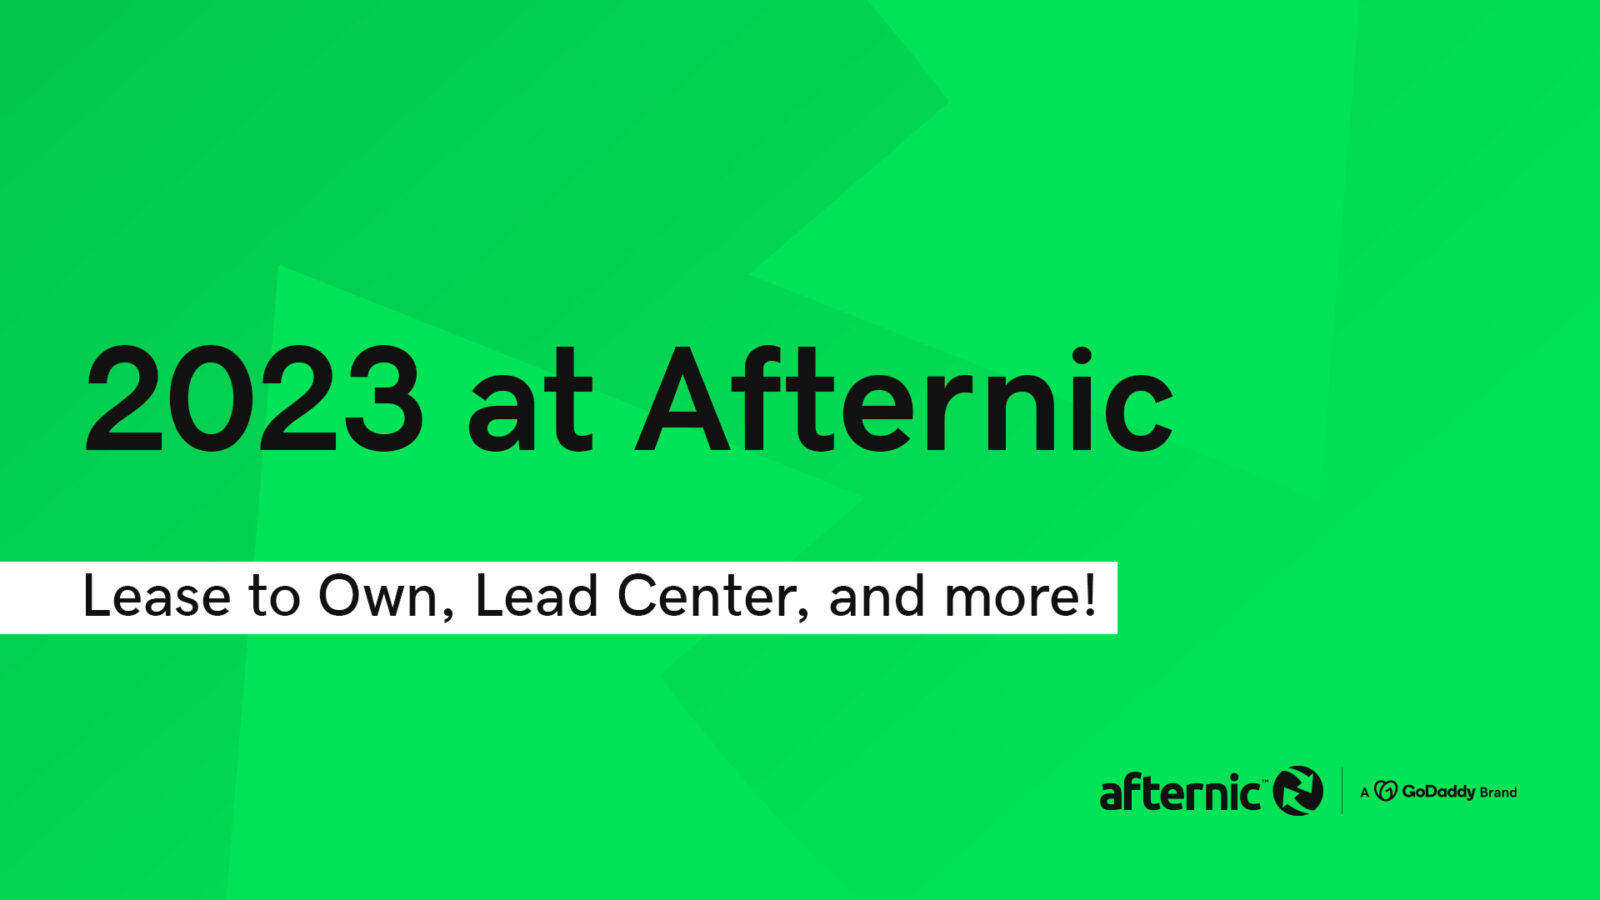 2023 at Afternic: Lease to Own, Lead Center, and more